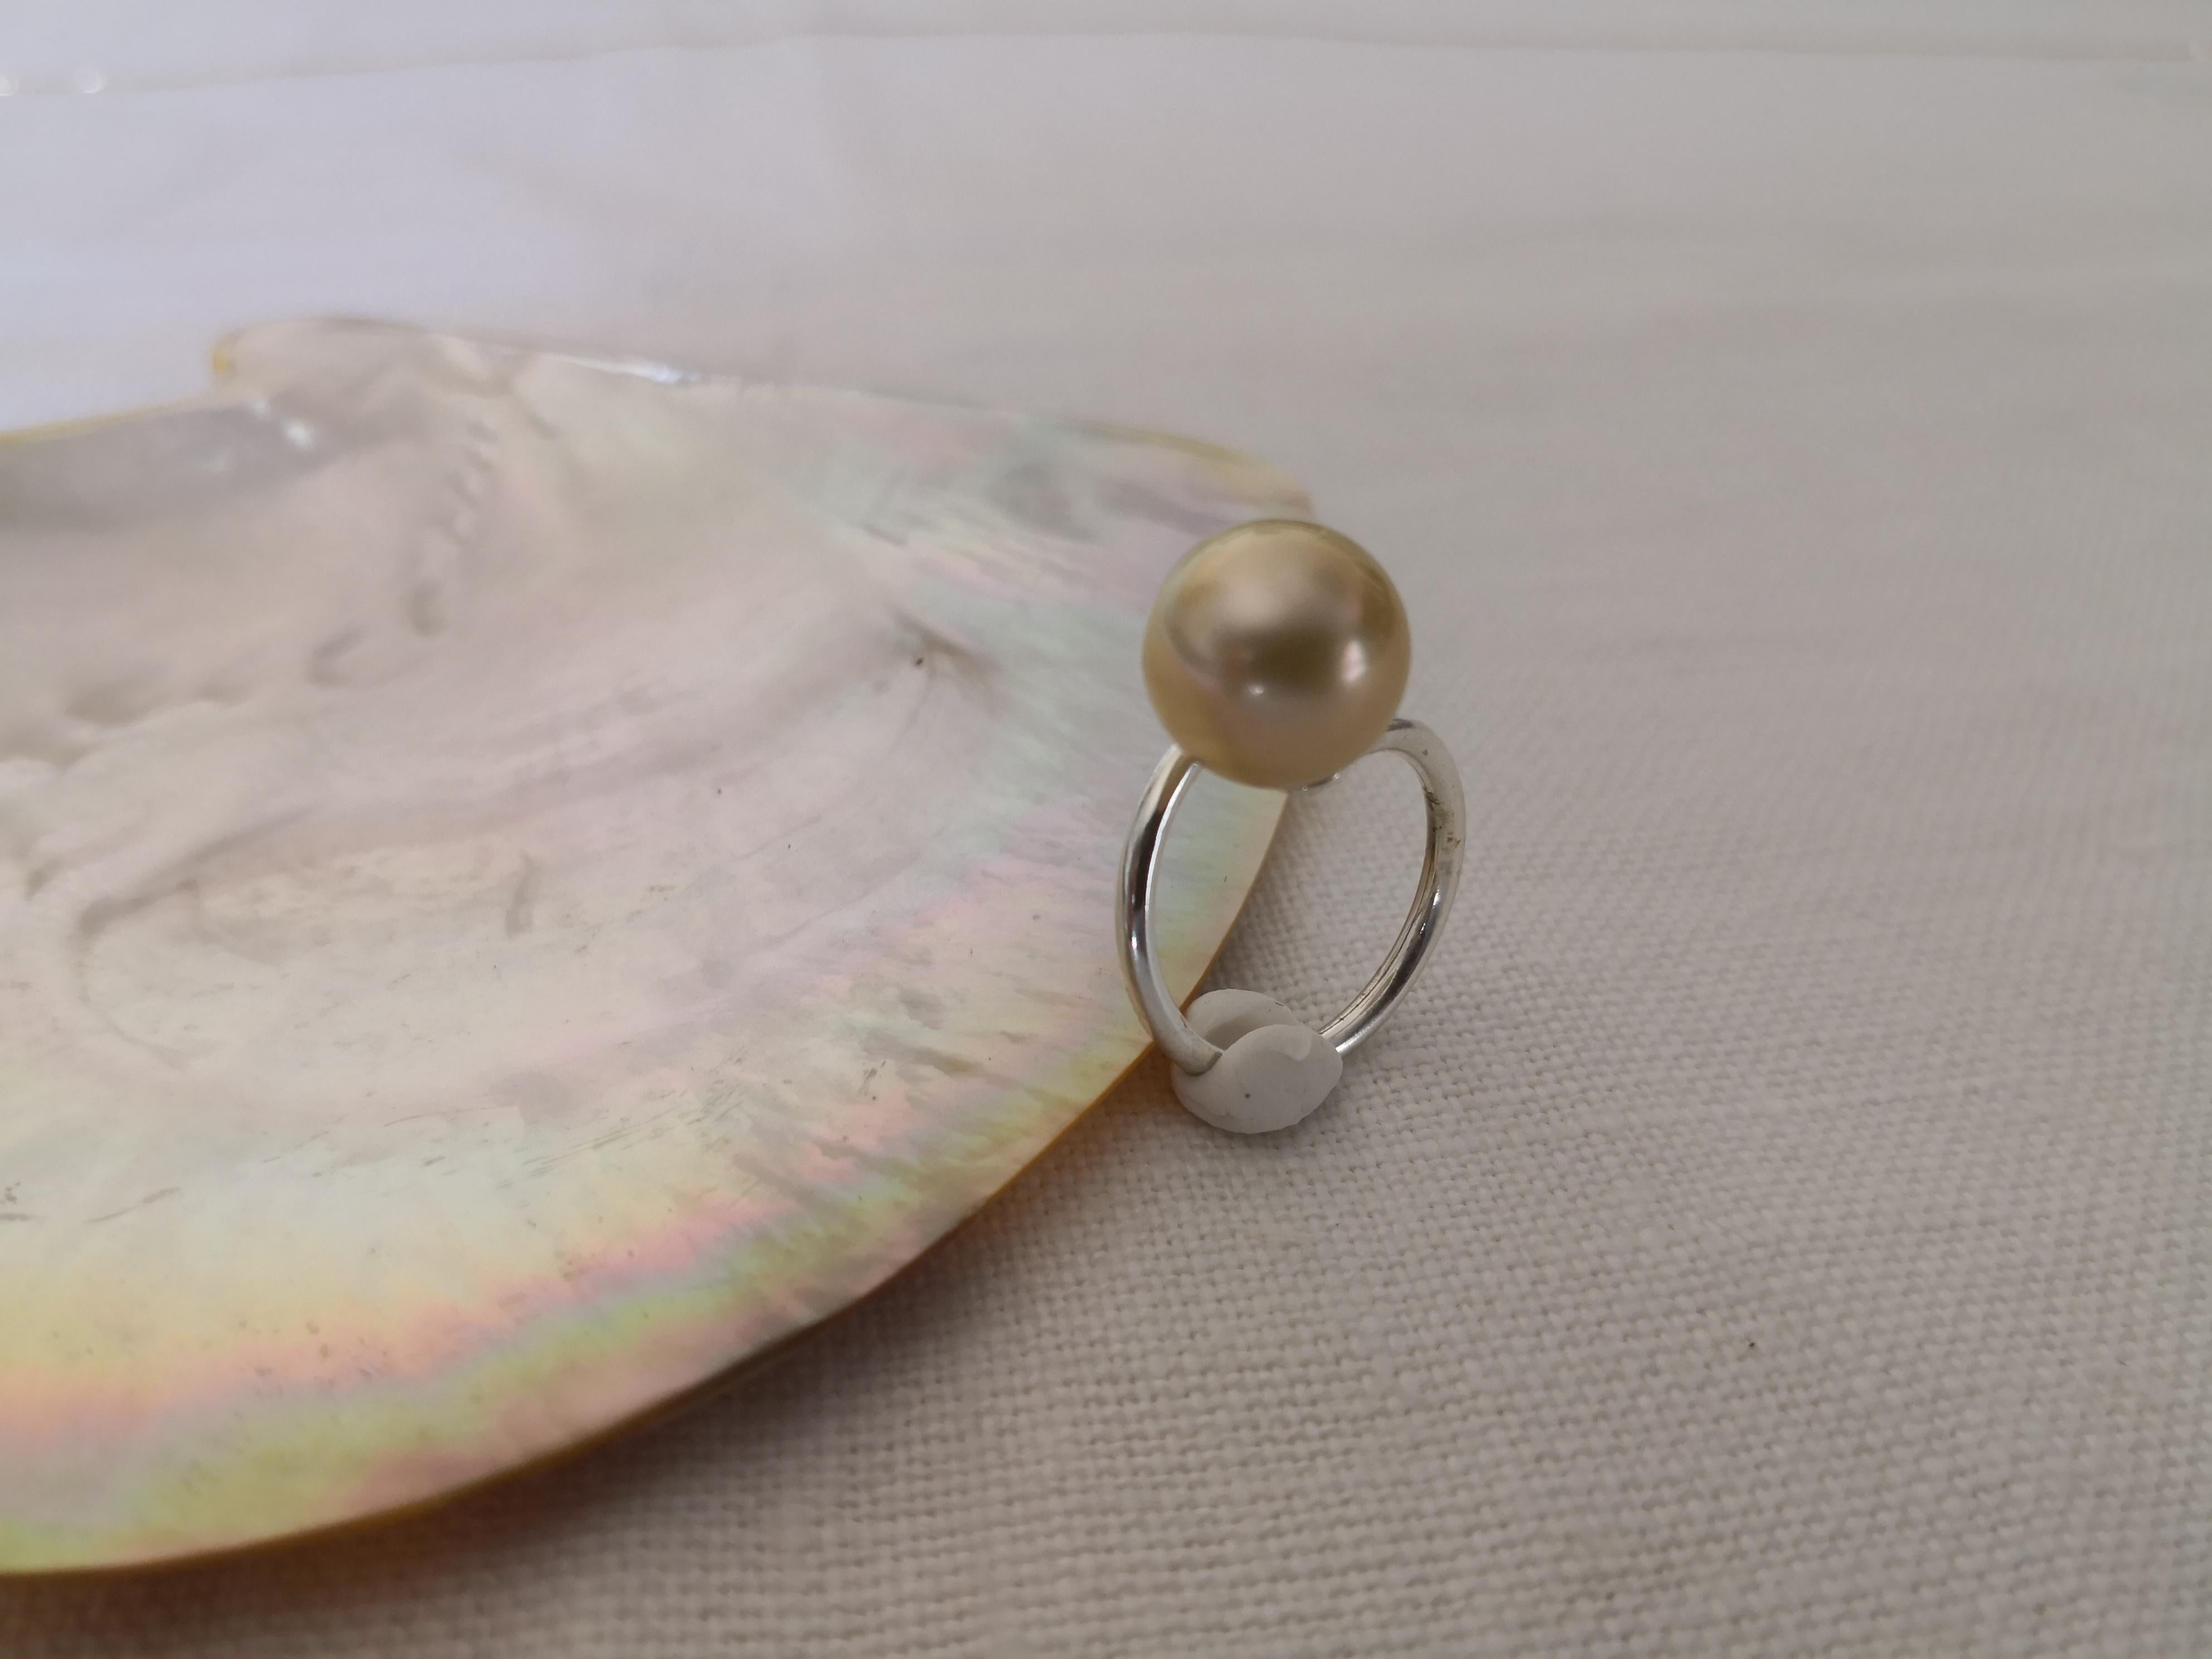 A Ring of a beautiful Golden Color South Sea Pearl and manufactured in Silver 925 mls.

- Size of Pearl 11.80 mm

- Shape: Round

- Origin of Pearl: Pinctada Maxima Oyster

- Area: Indonesia Ocean Waters

- Color: Pearl of Deep Golden Natural